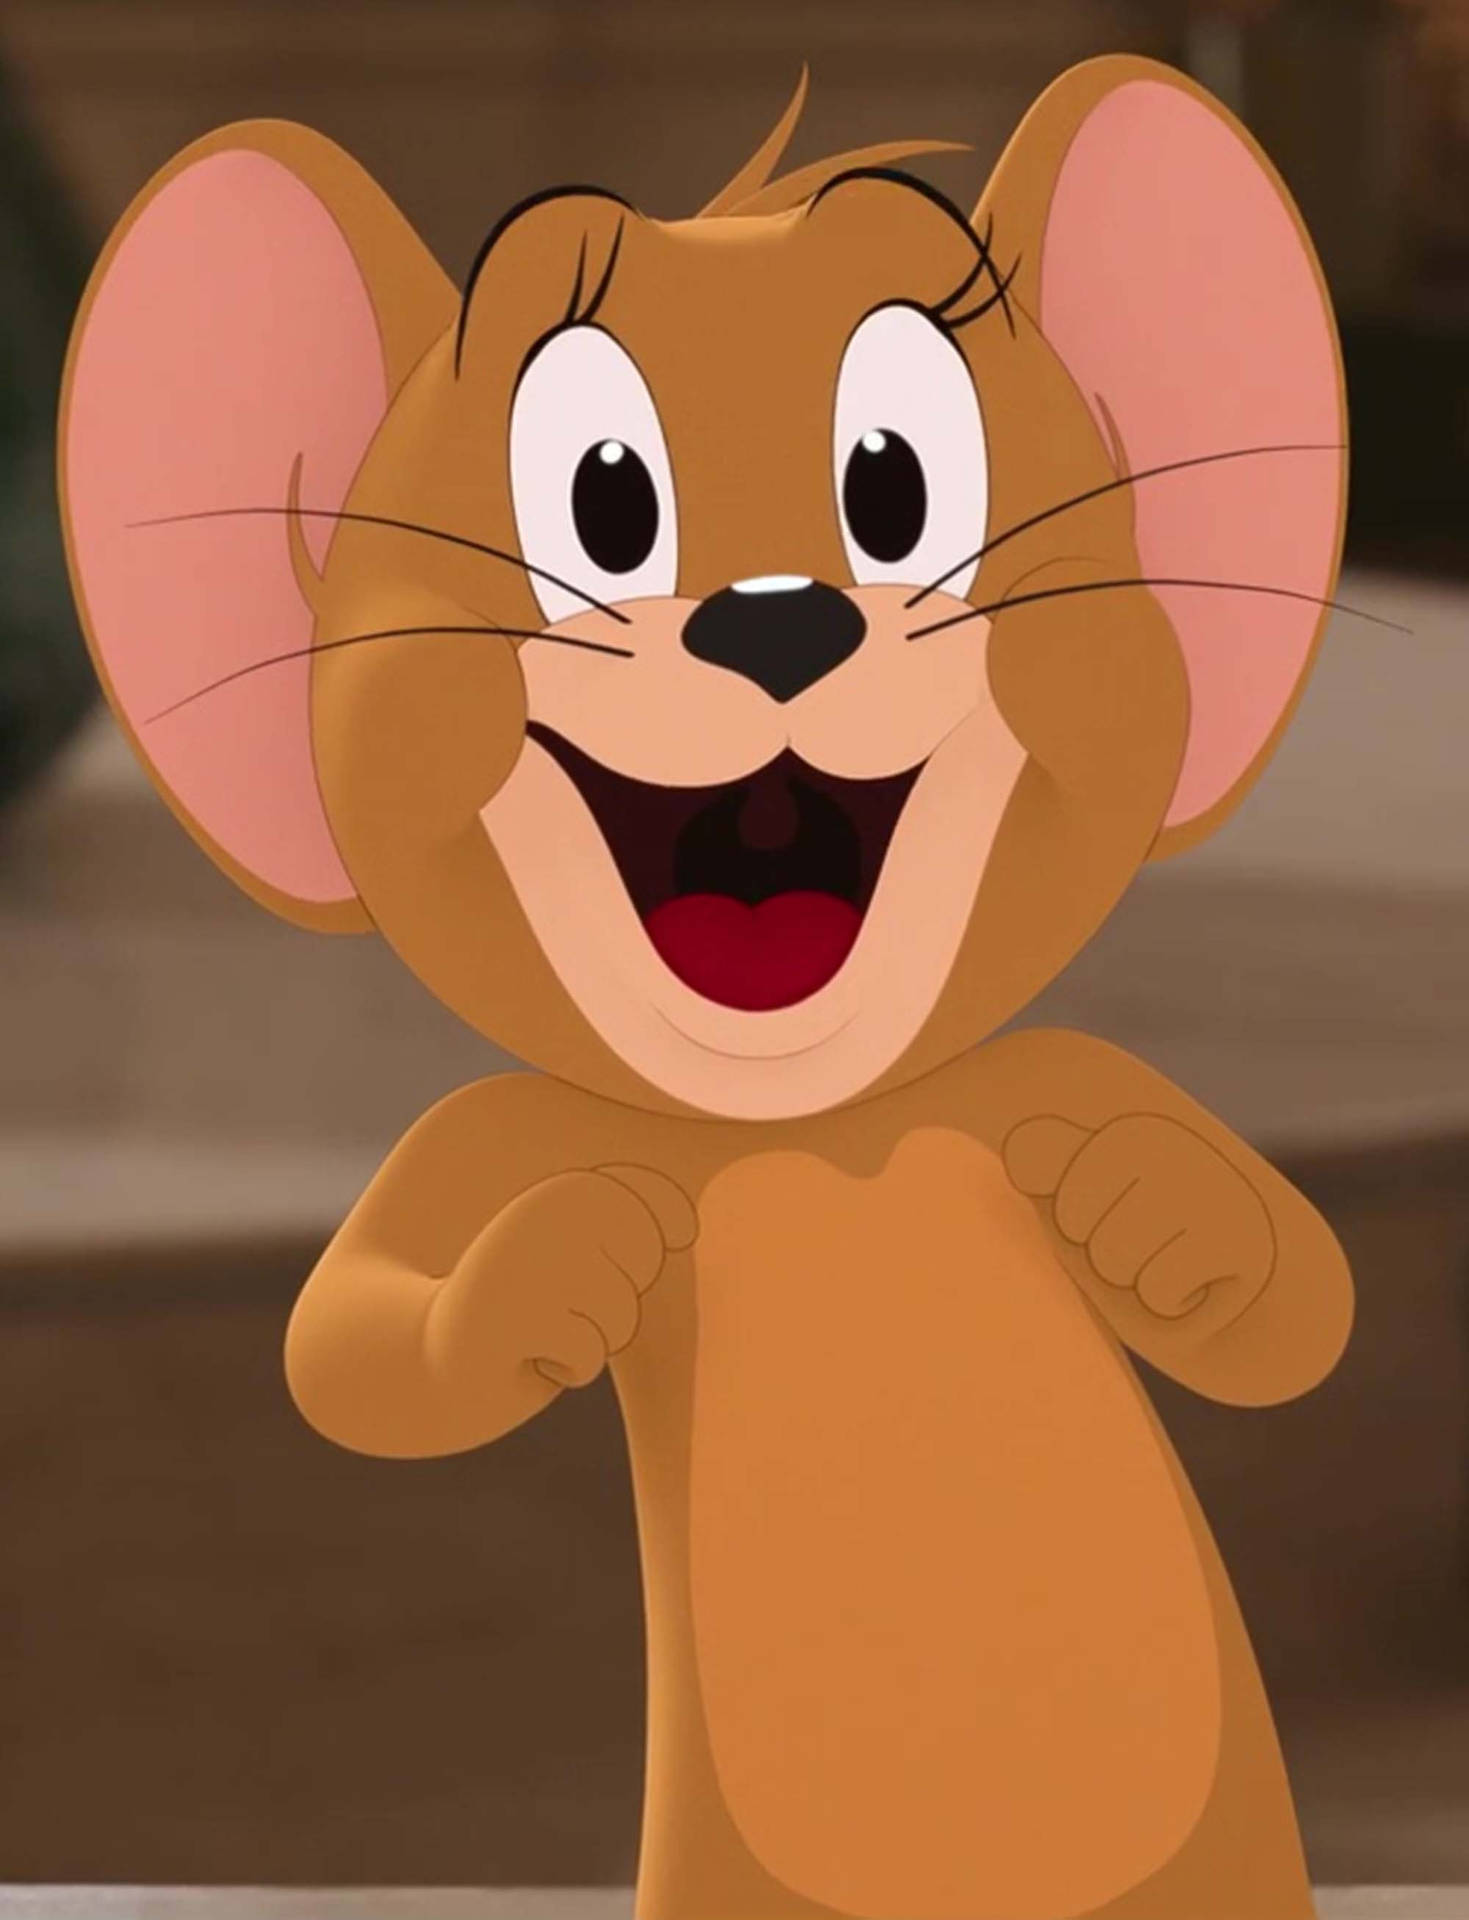 Free Jerry Mouse Wallpaper Downloads, [100+] Jerry Mouse Wallpapers for  FREE 